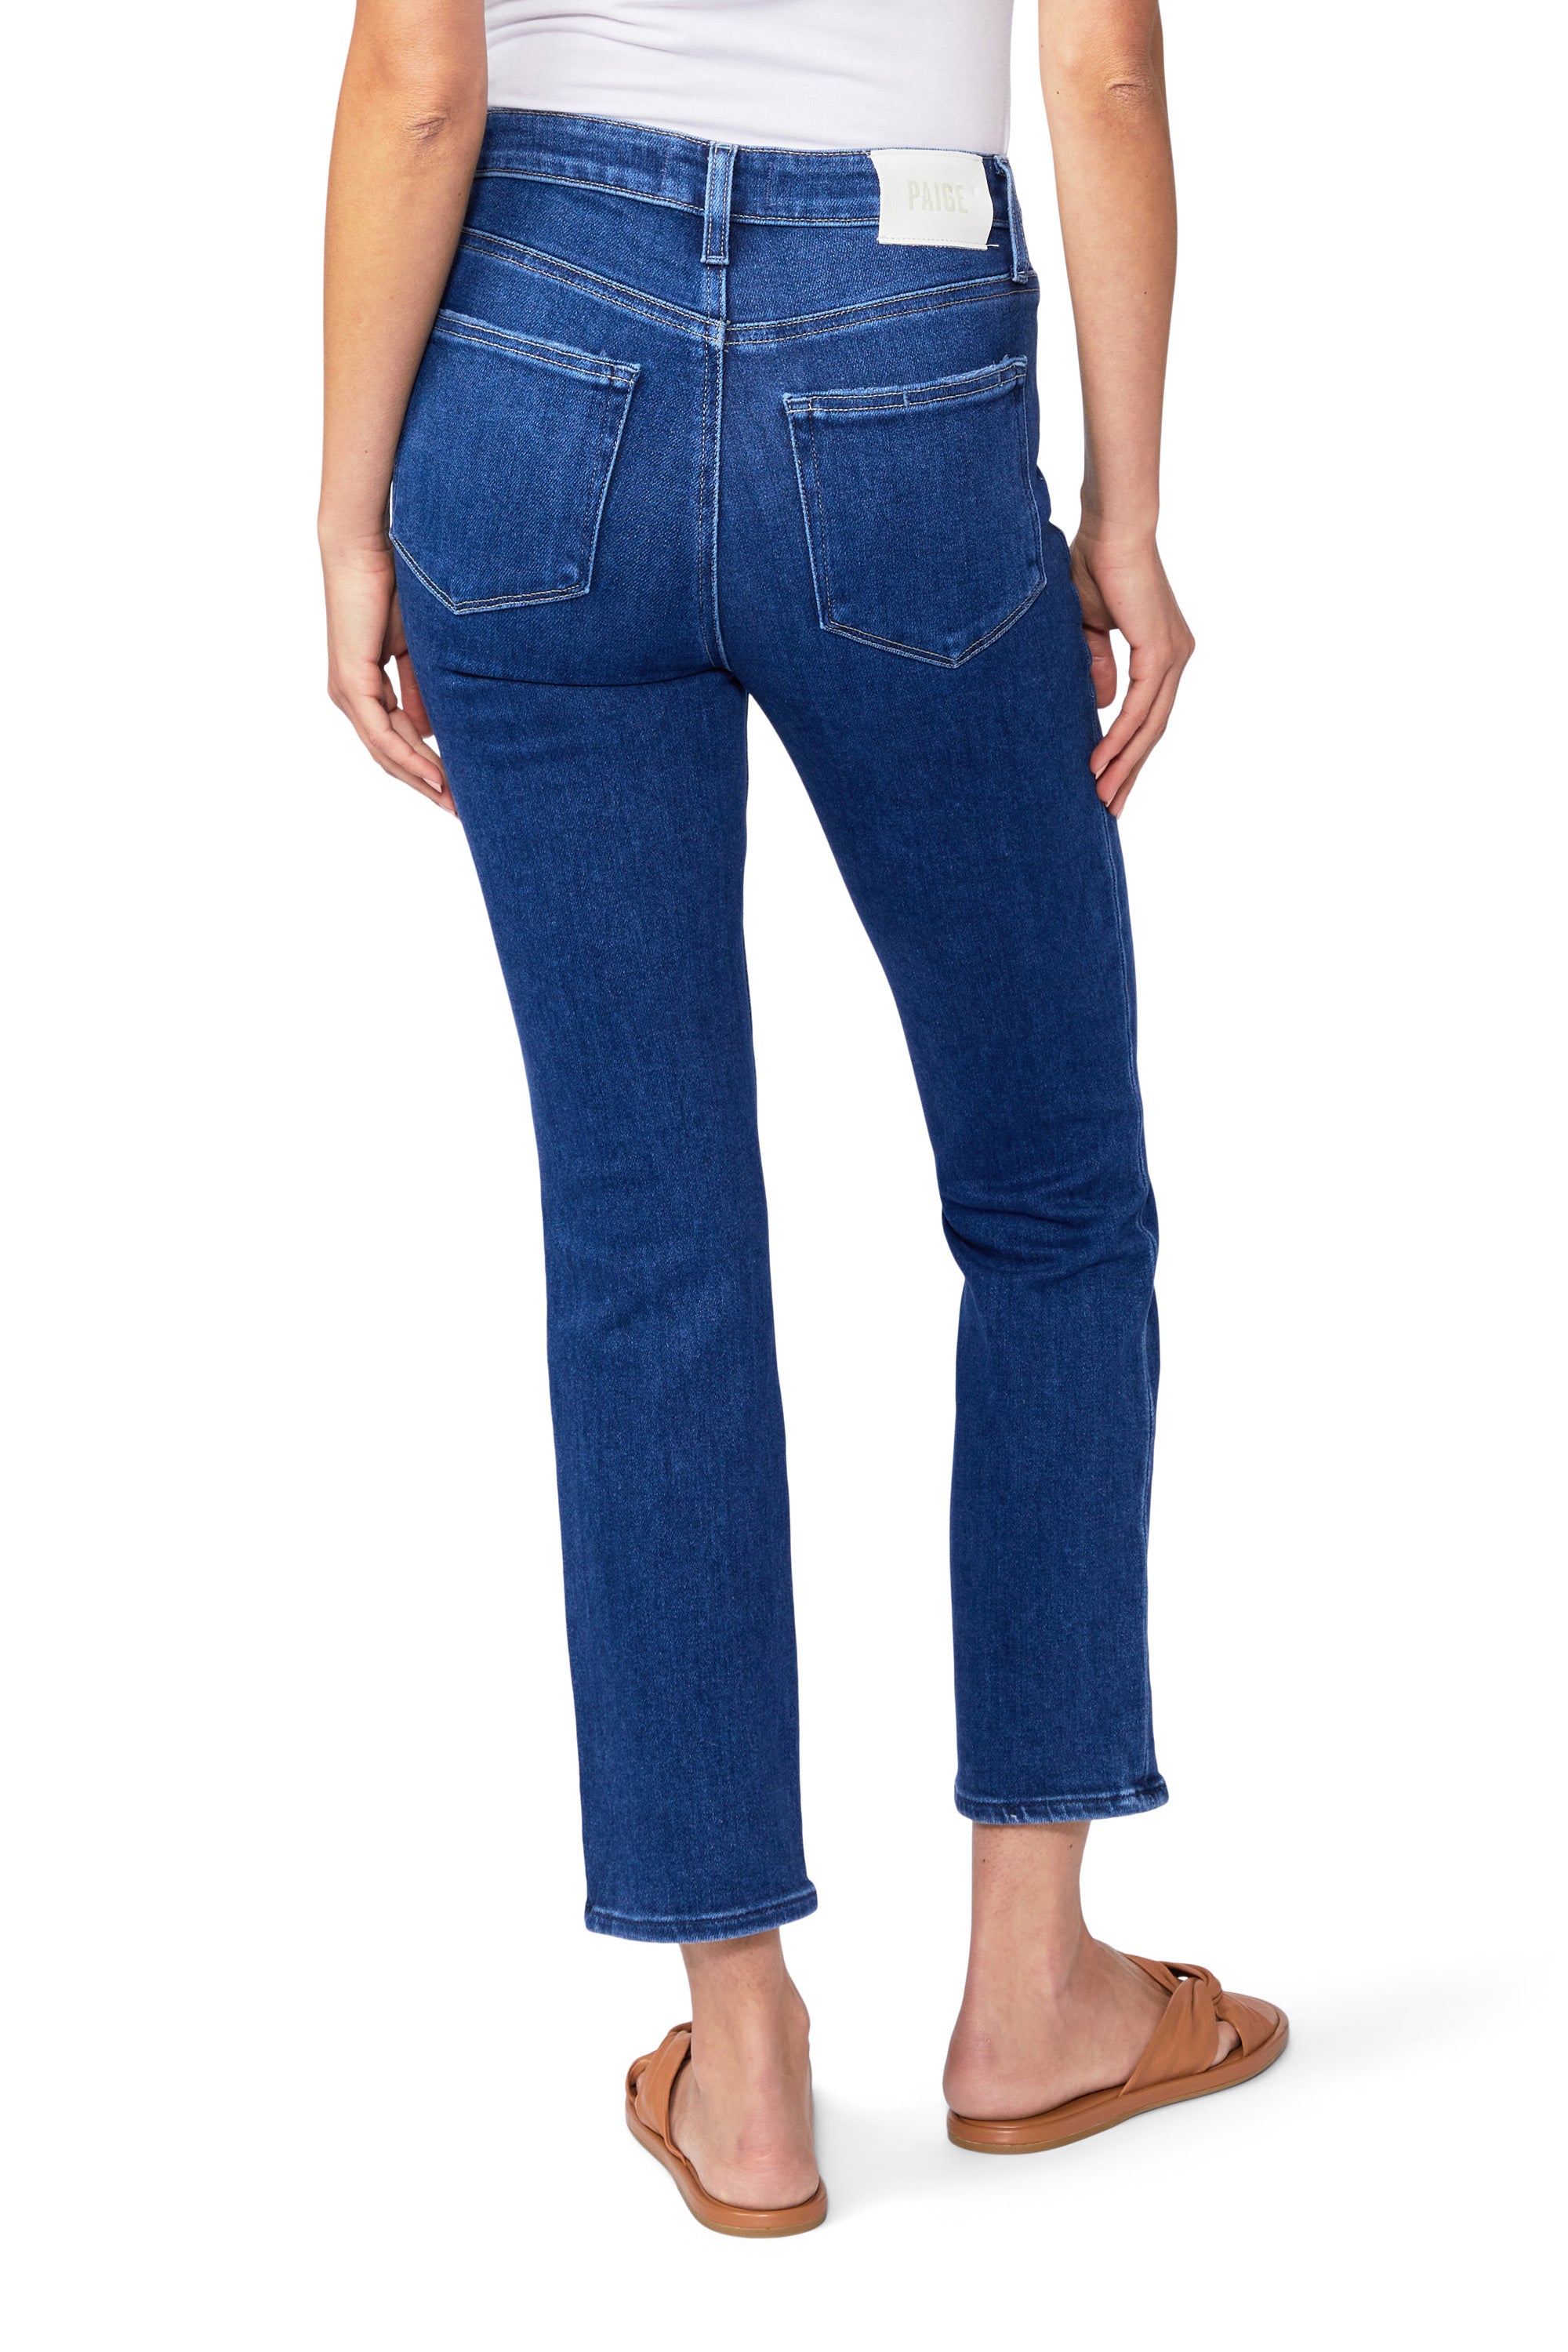 The high rise back view of a woman wearing Paige Cindy Straight Ankle - Soleil denim jeans.